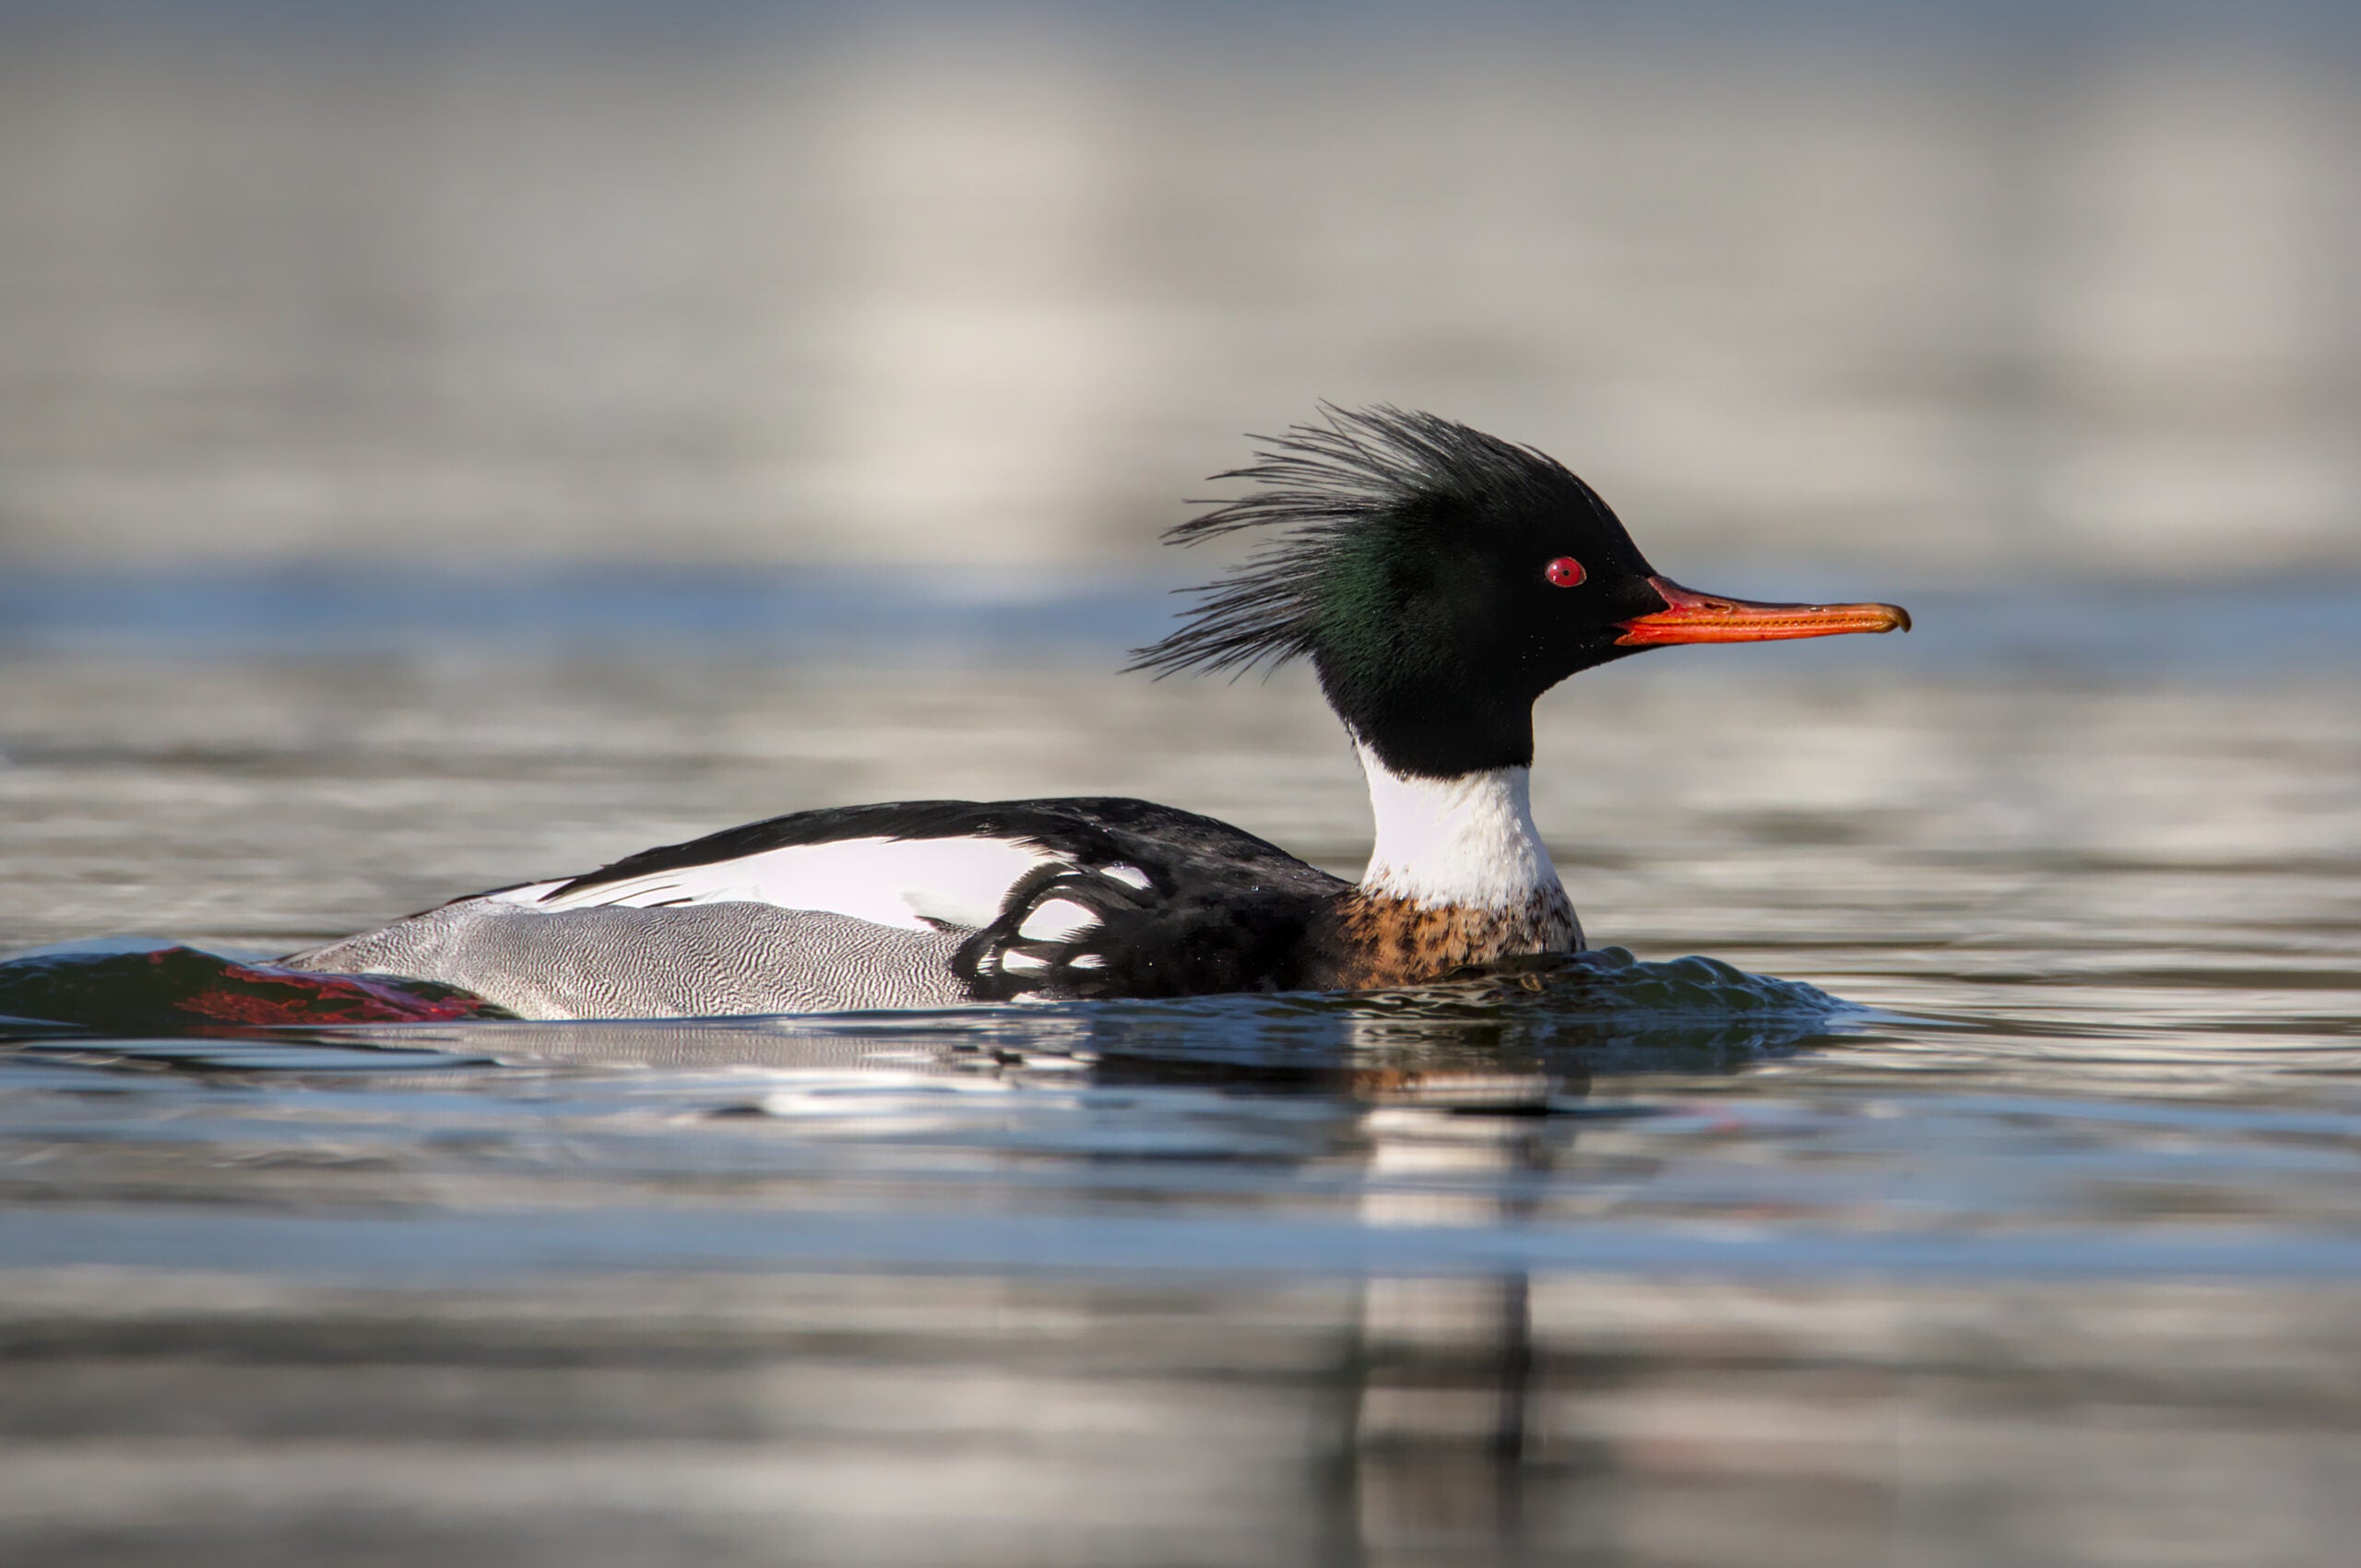 Photo of a red-breasted merganser duck on the water